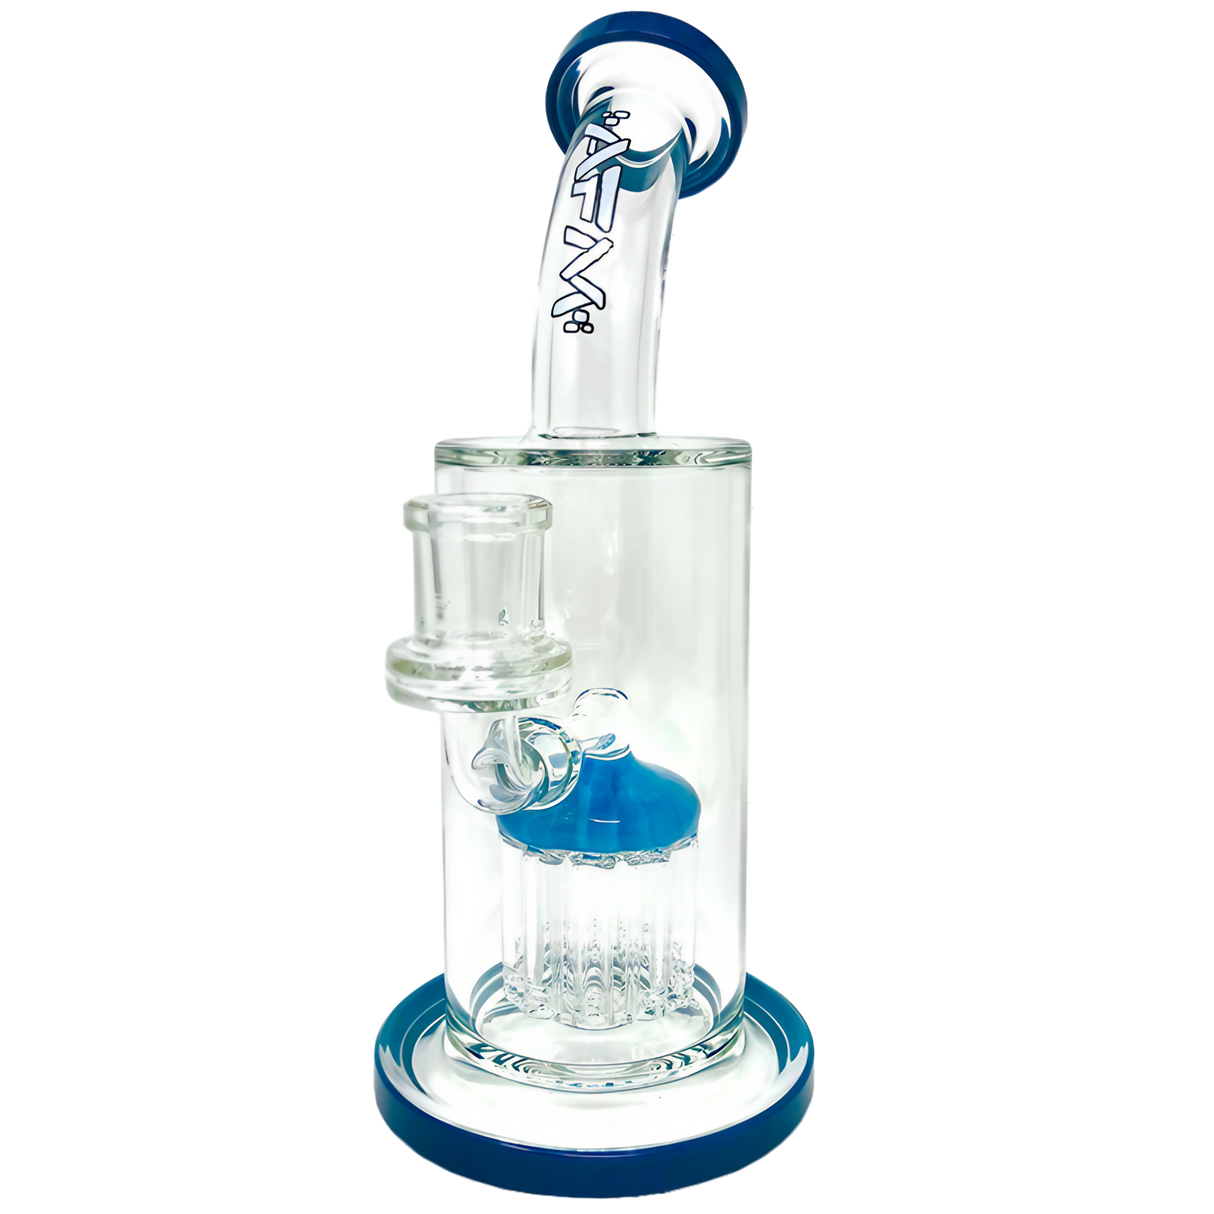 AFM Glass - The Groovy 10 Arm 9" Dab Rig with Hammer Head Percolator and Blue Accents